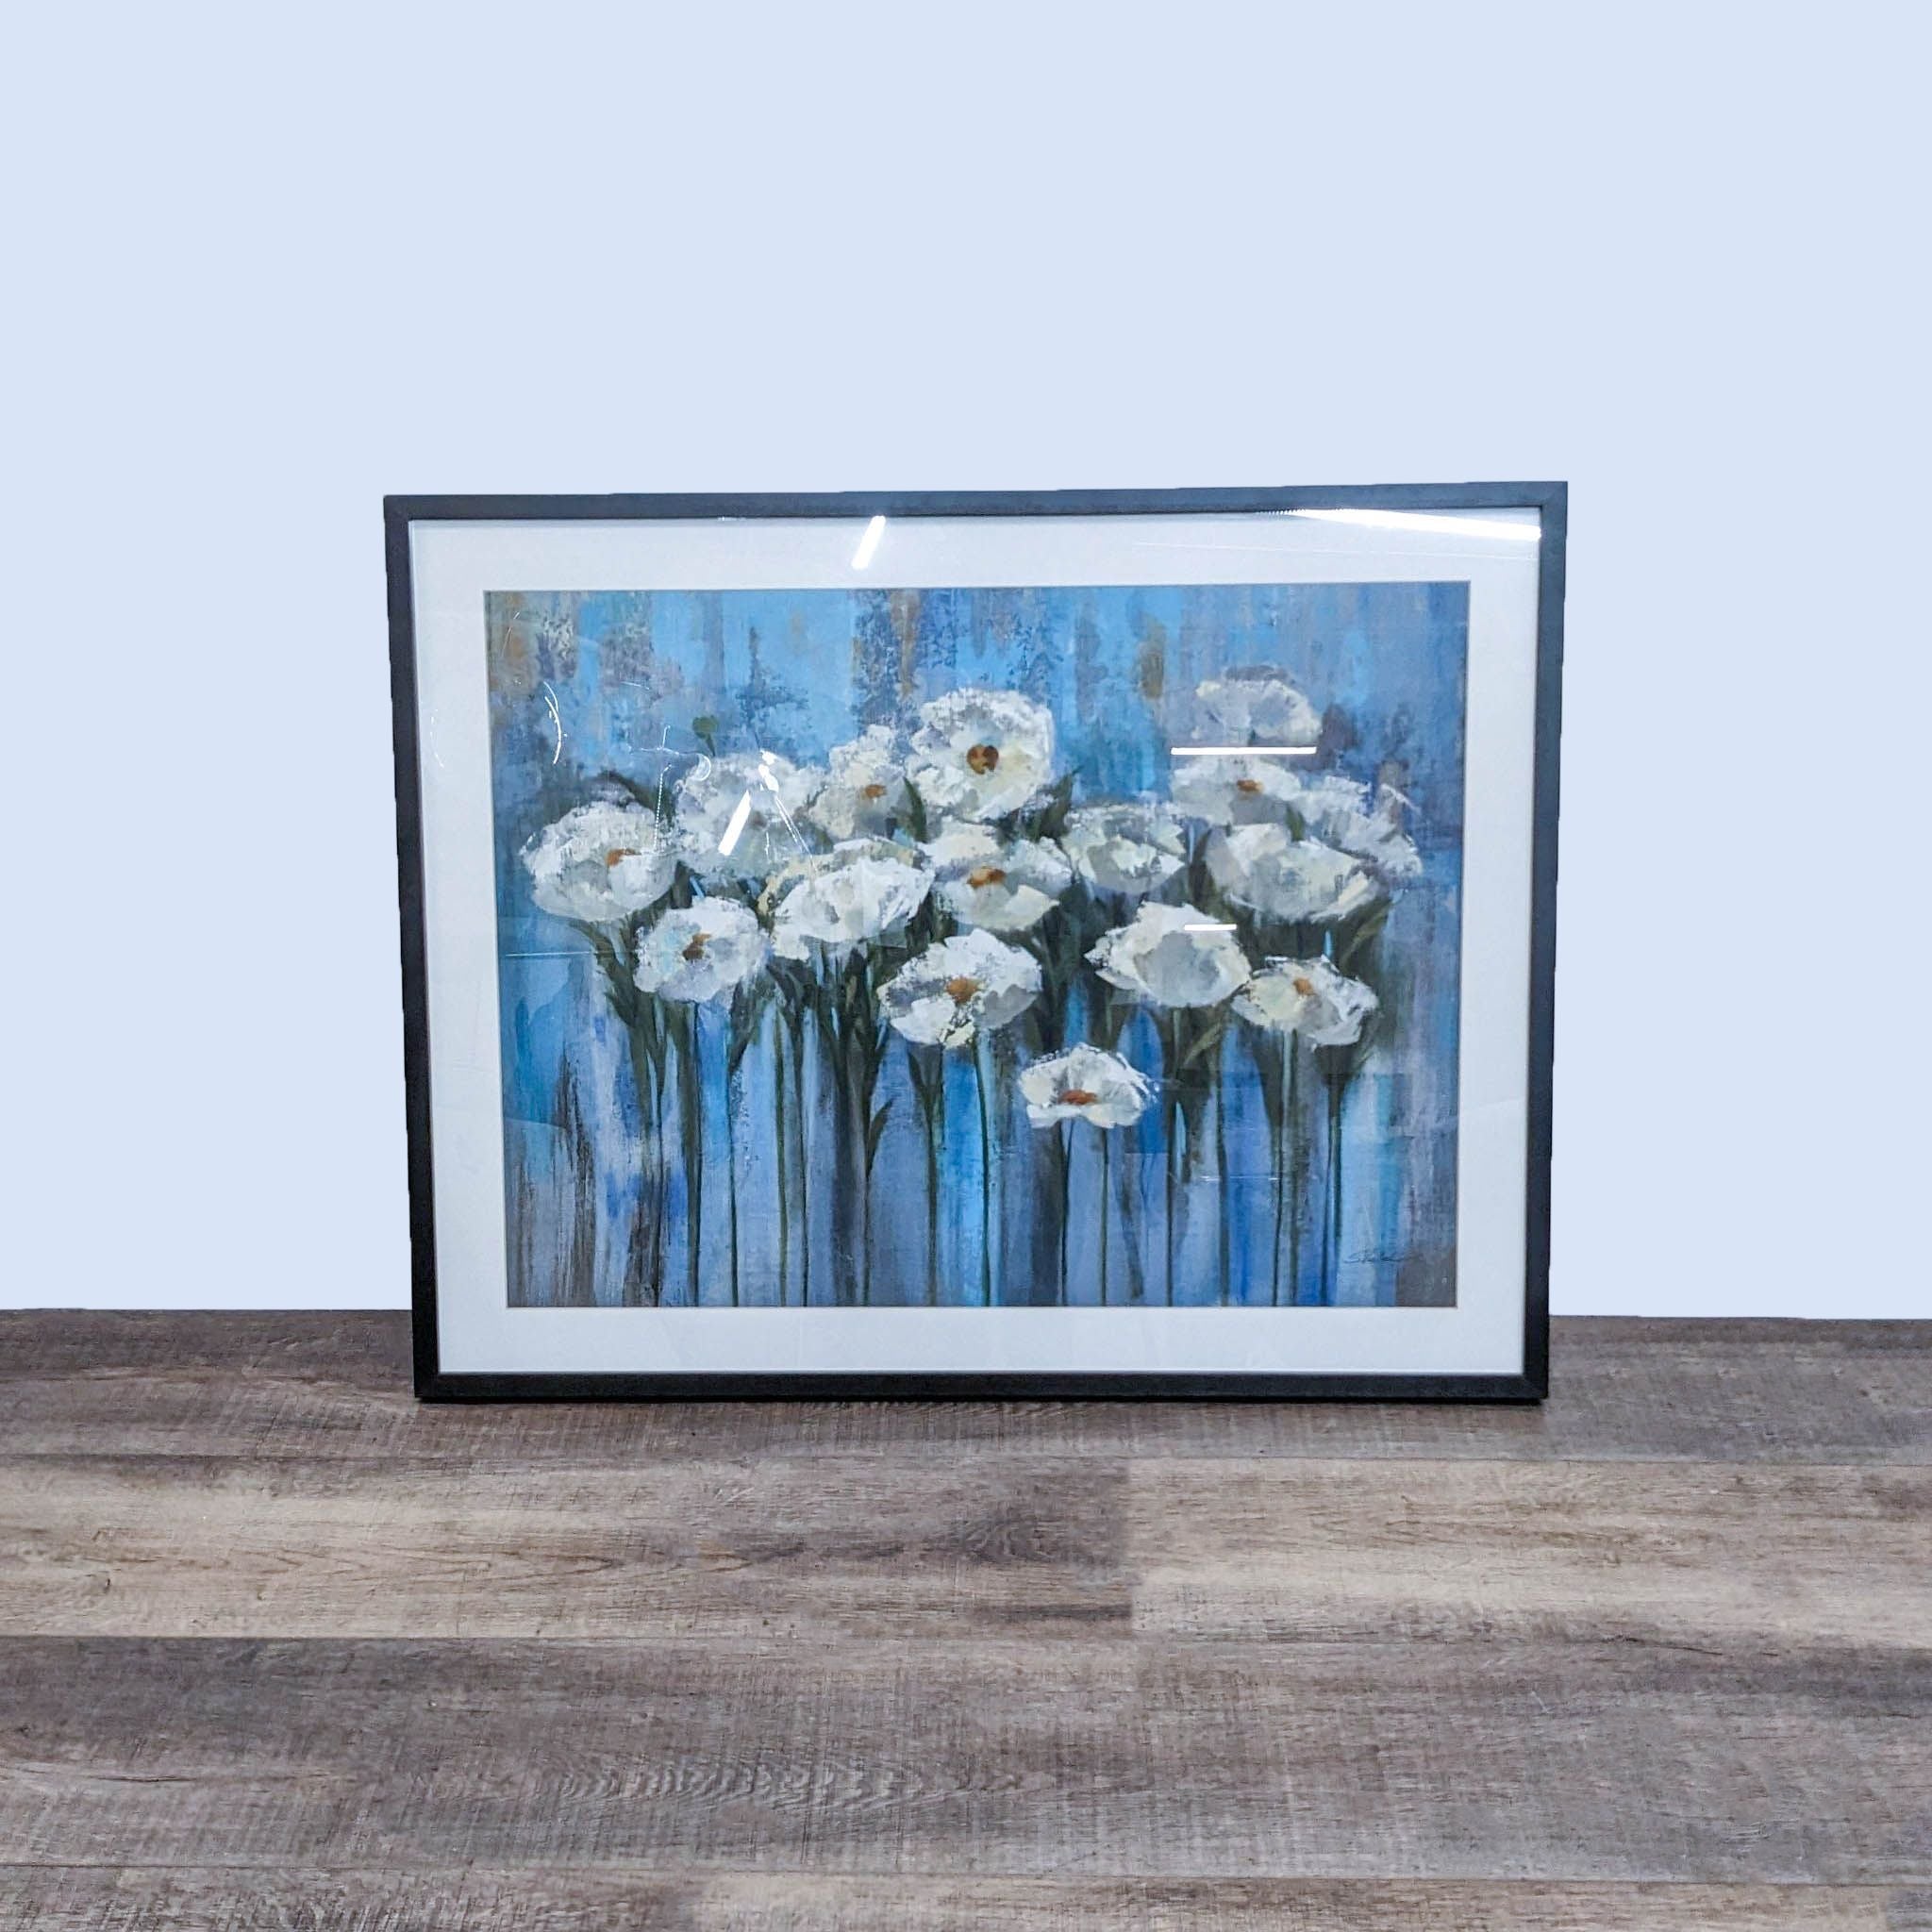 Framed floral painting by Art.com craftsman on table, featuring white flowers against a blue background.